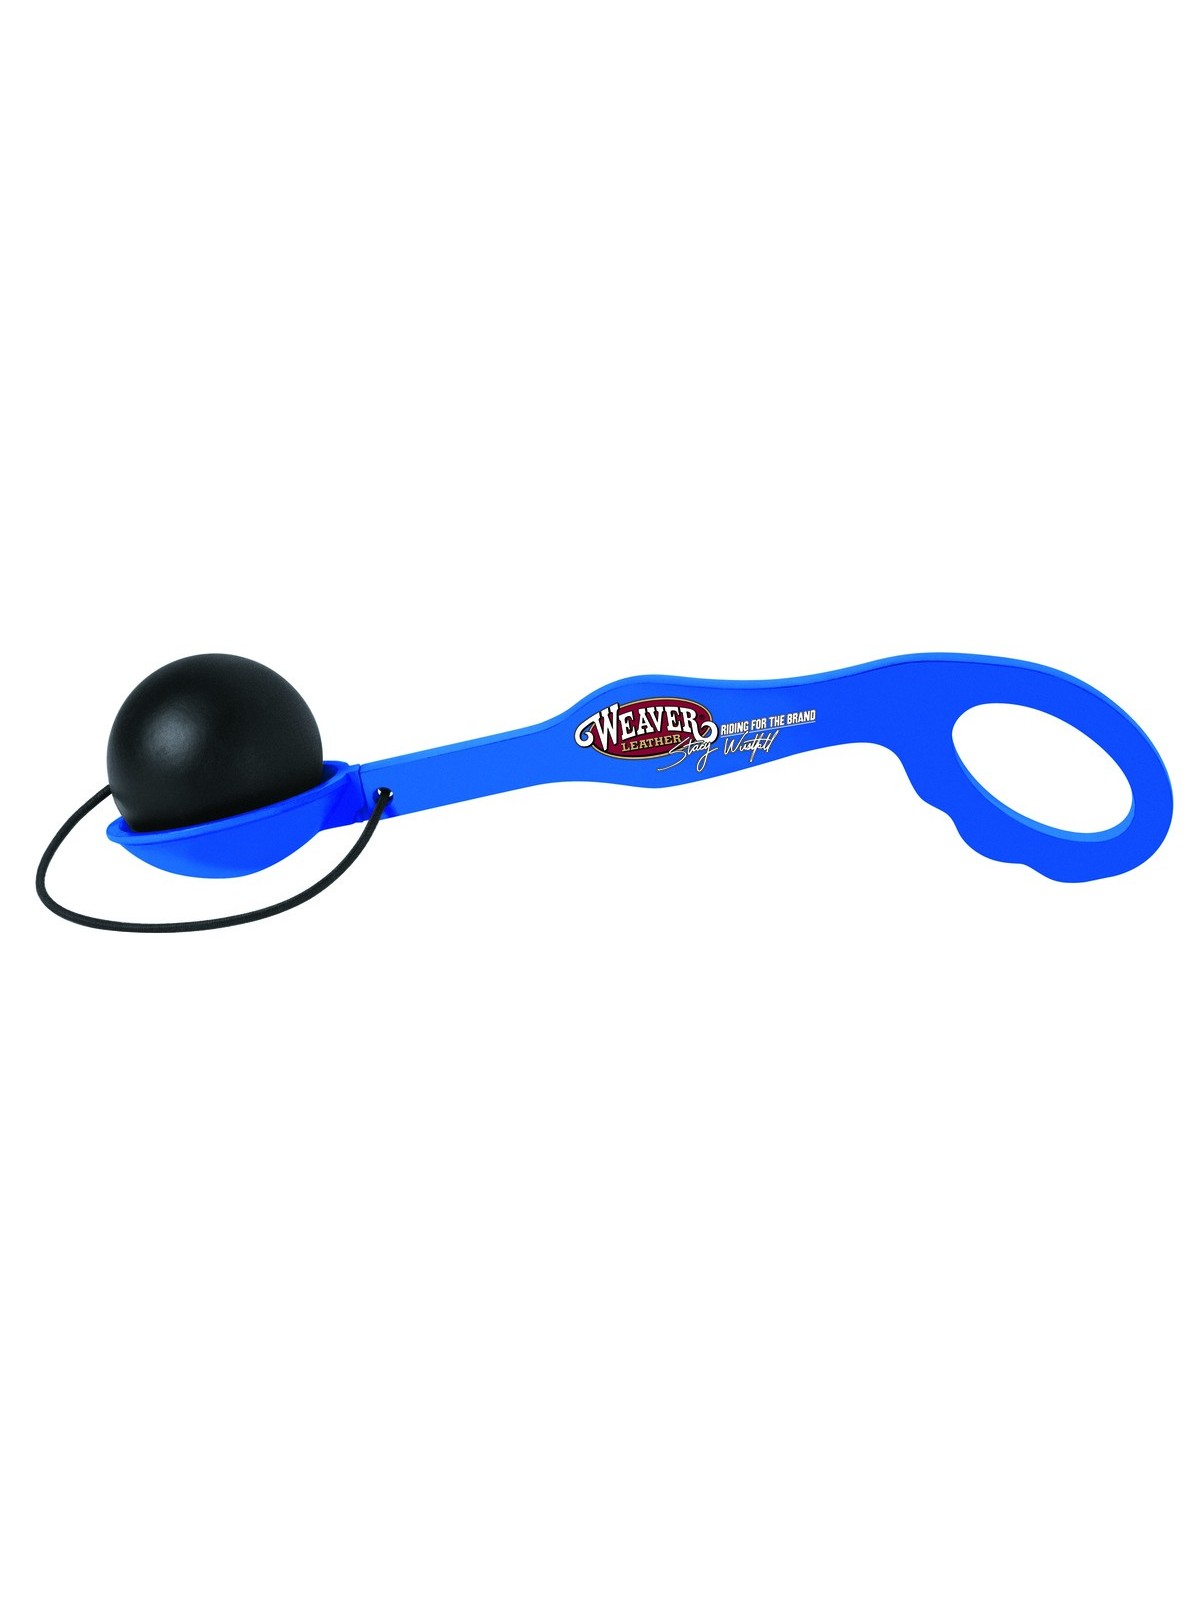 Stacy Westfall Egg and Spoon Training Tool 65-2407